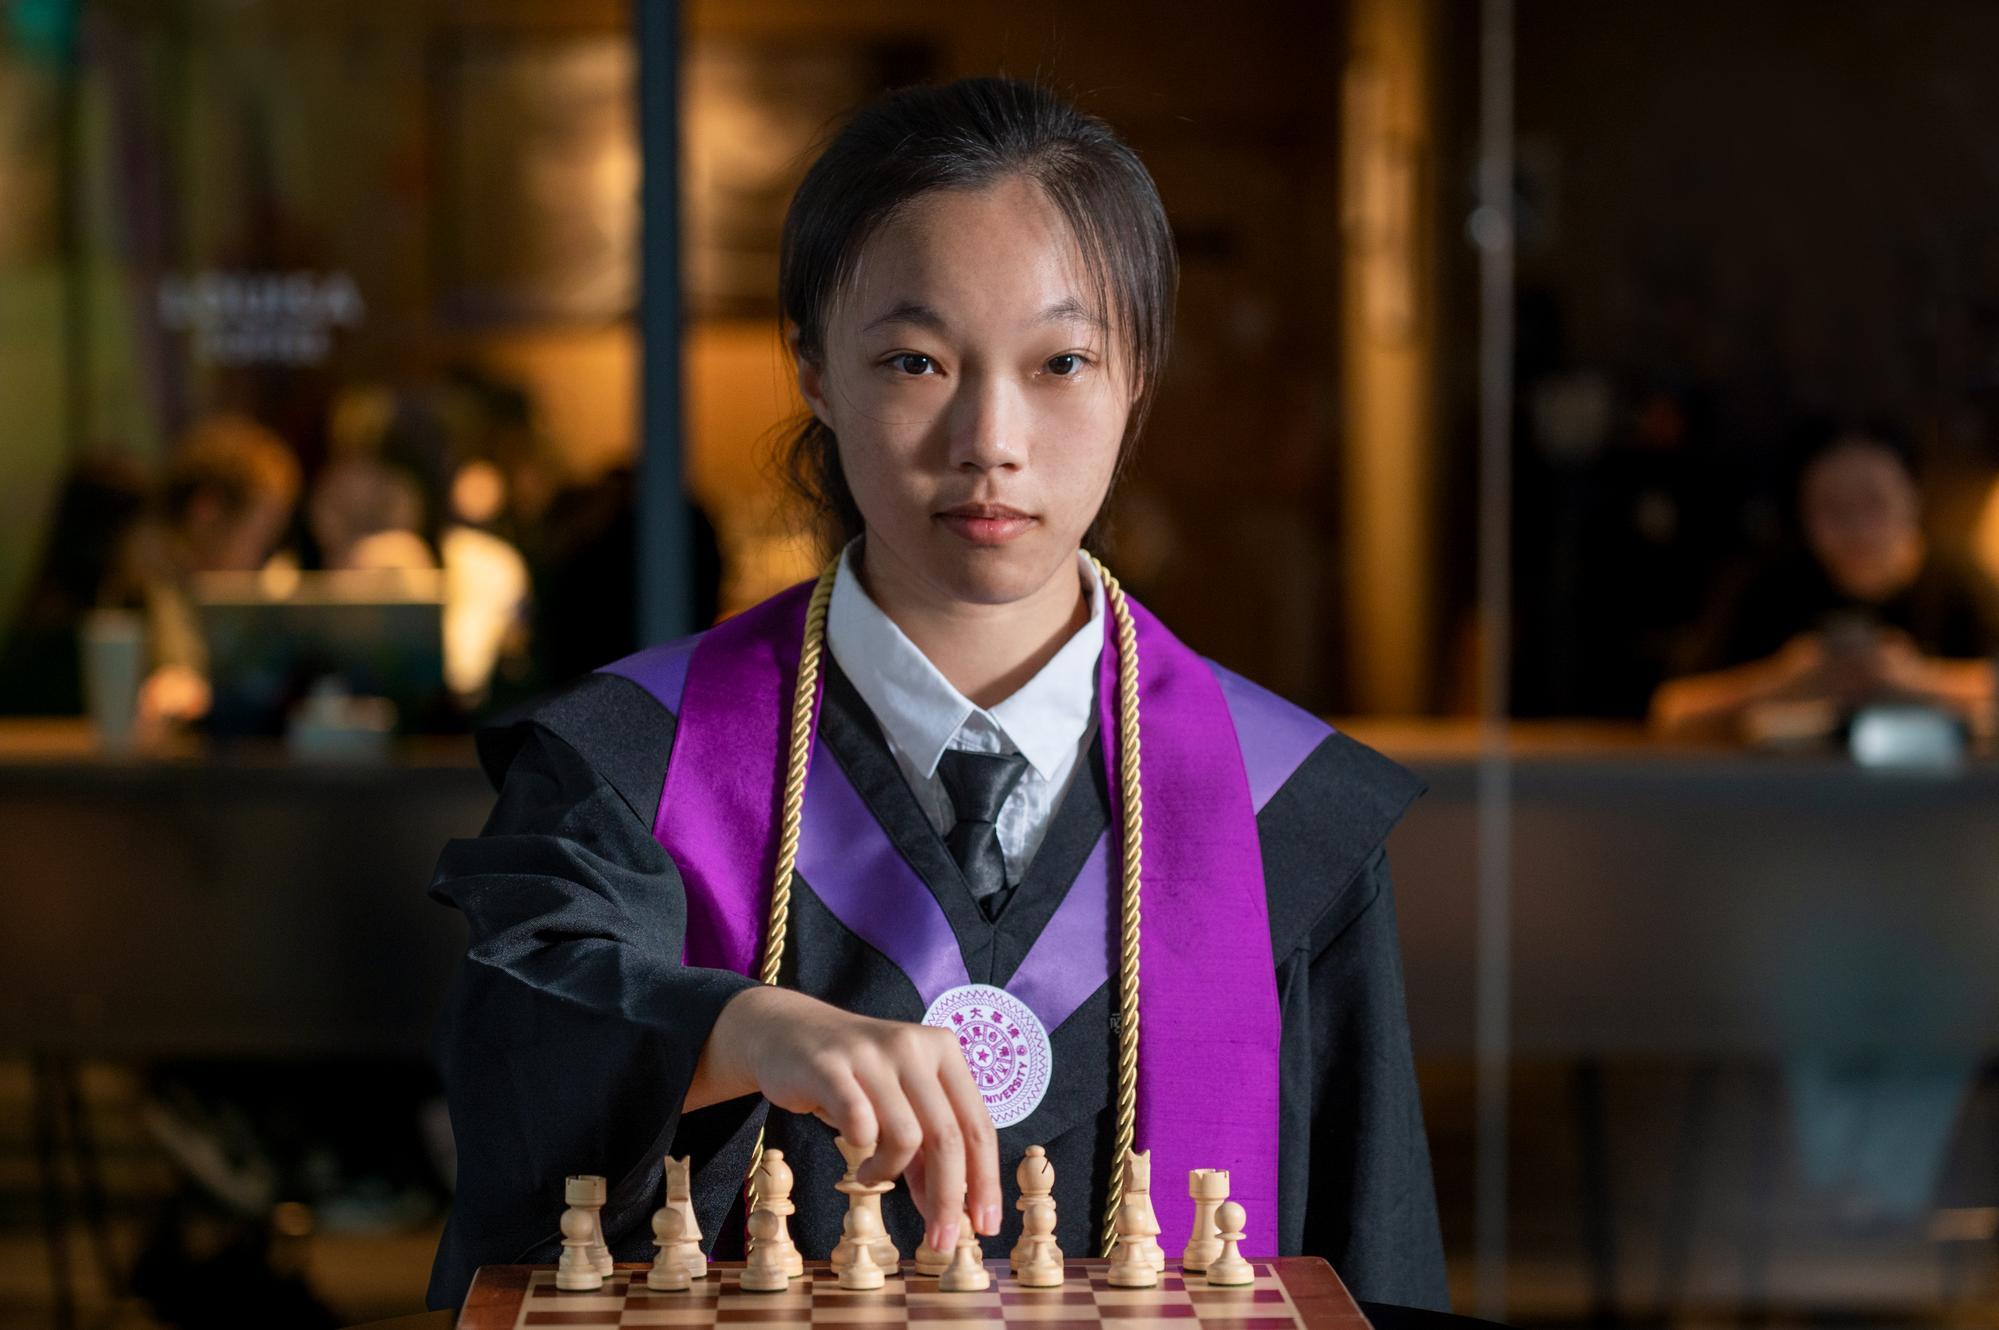 One of the recipients of Yi-Chi Mei Memorial Medal, Yu-Hsin Weng (翁玉芯) represents Taiwan in various international chess competitions.